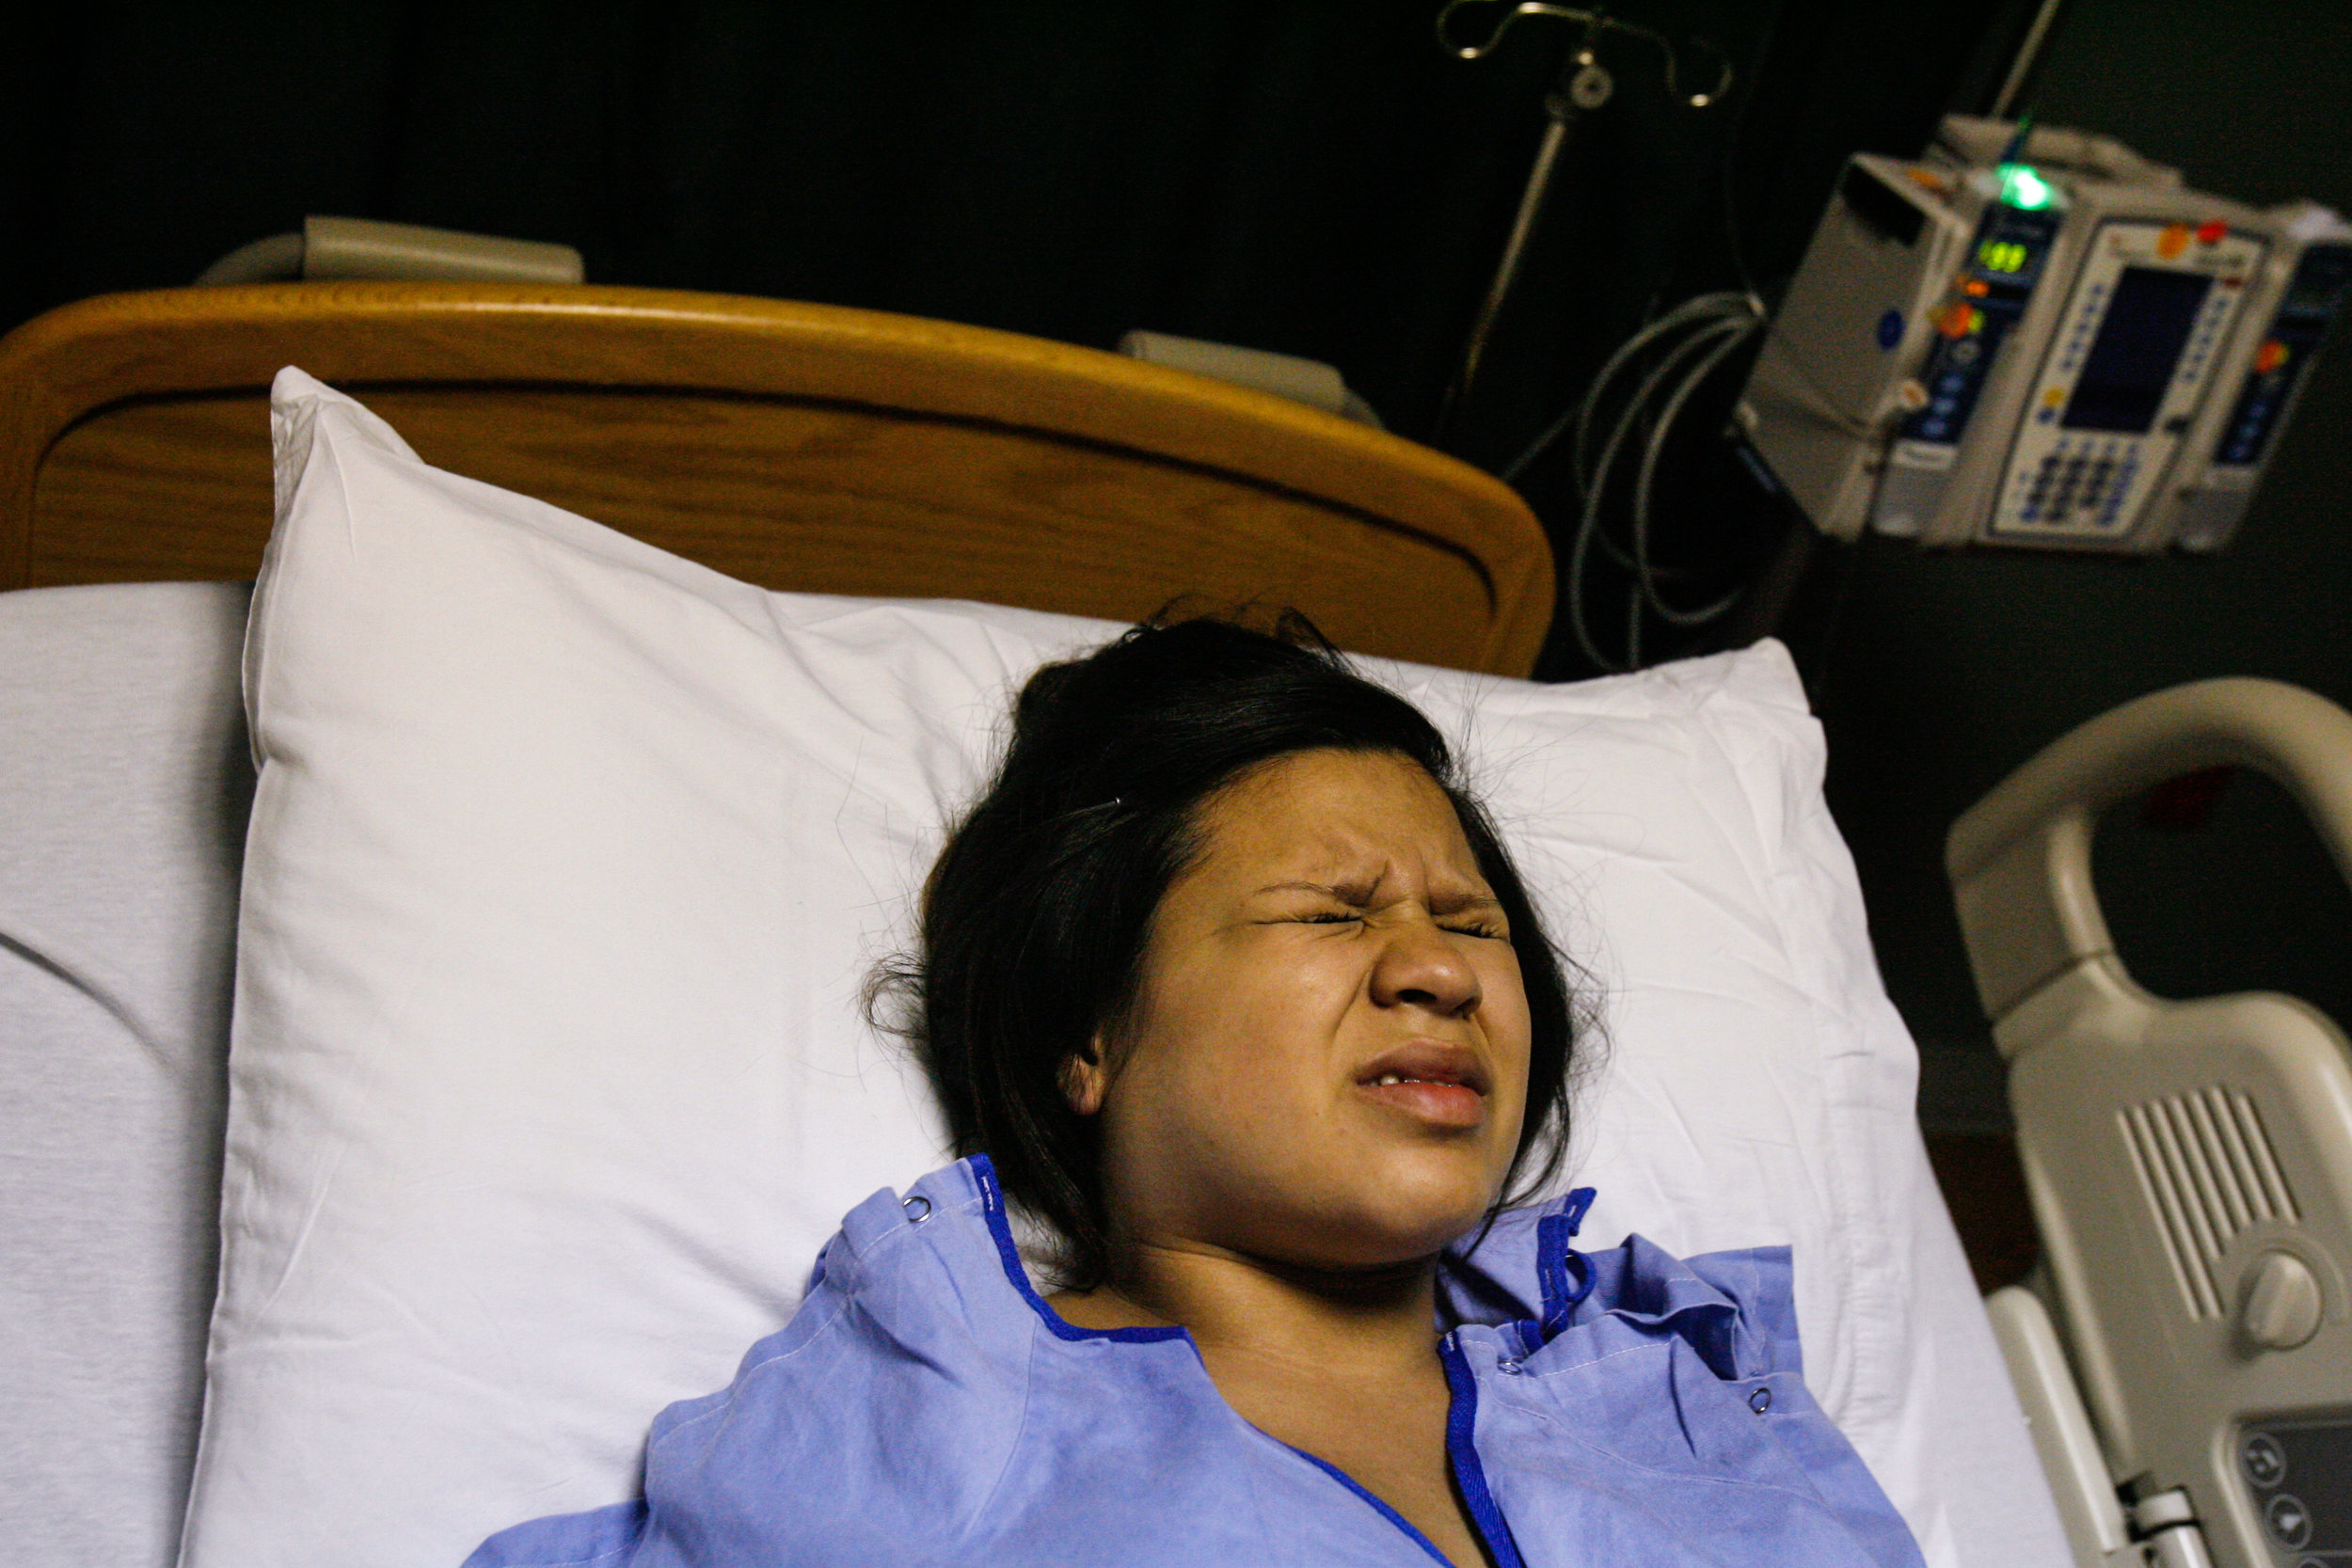  Deana Martinez, 17, grimaces during a contraction while in labor May 21, 2008, at Medical Center Hospital in Odessa, Texas. Martinez was in labor for 32 hours before she delivered, and spent the day at school before checking into the hospital. 